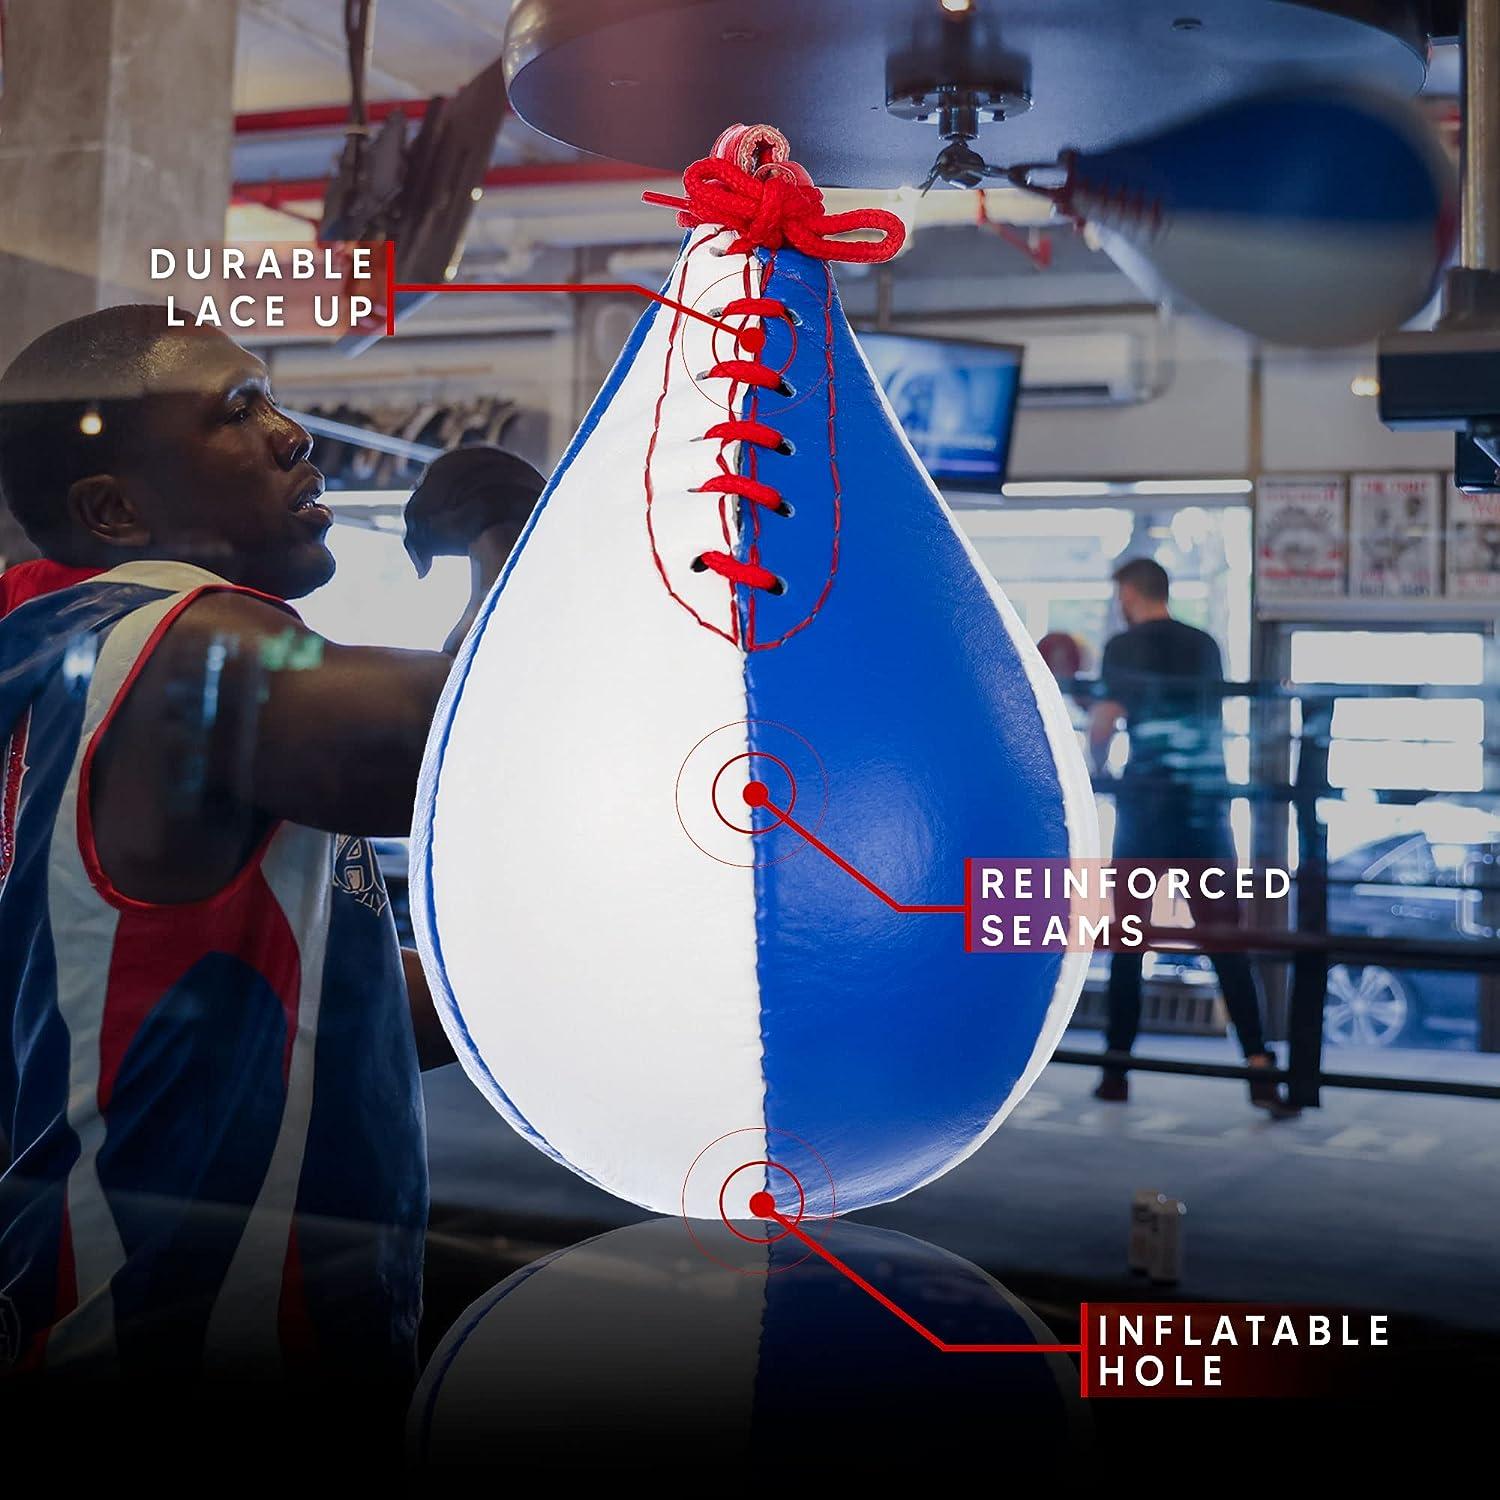 pear ball boxing, pear ball boxing Suppliers and Manufacturers at